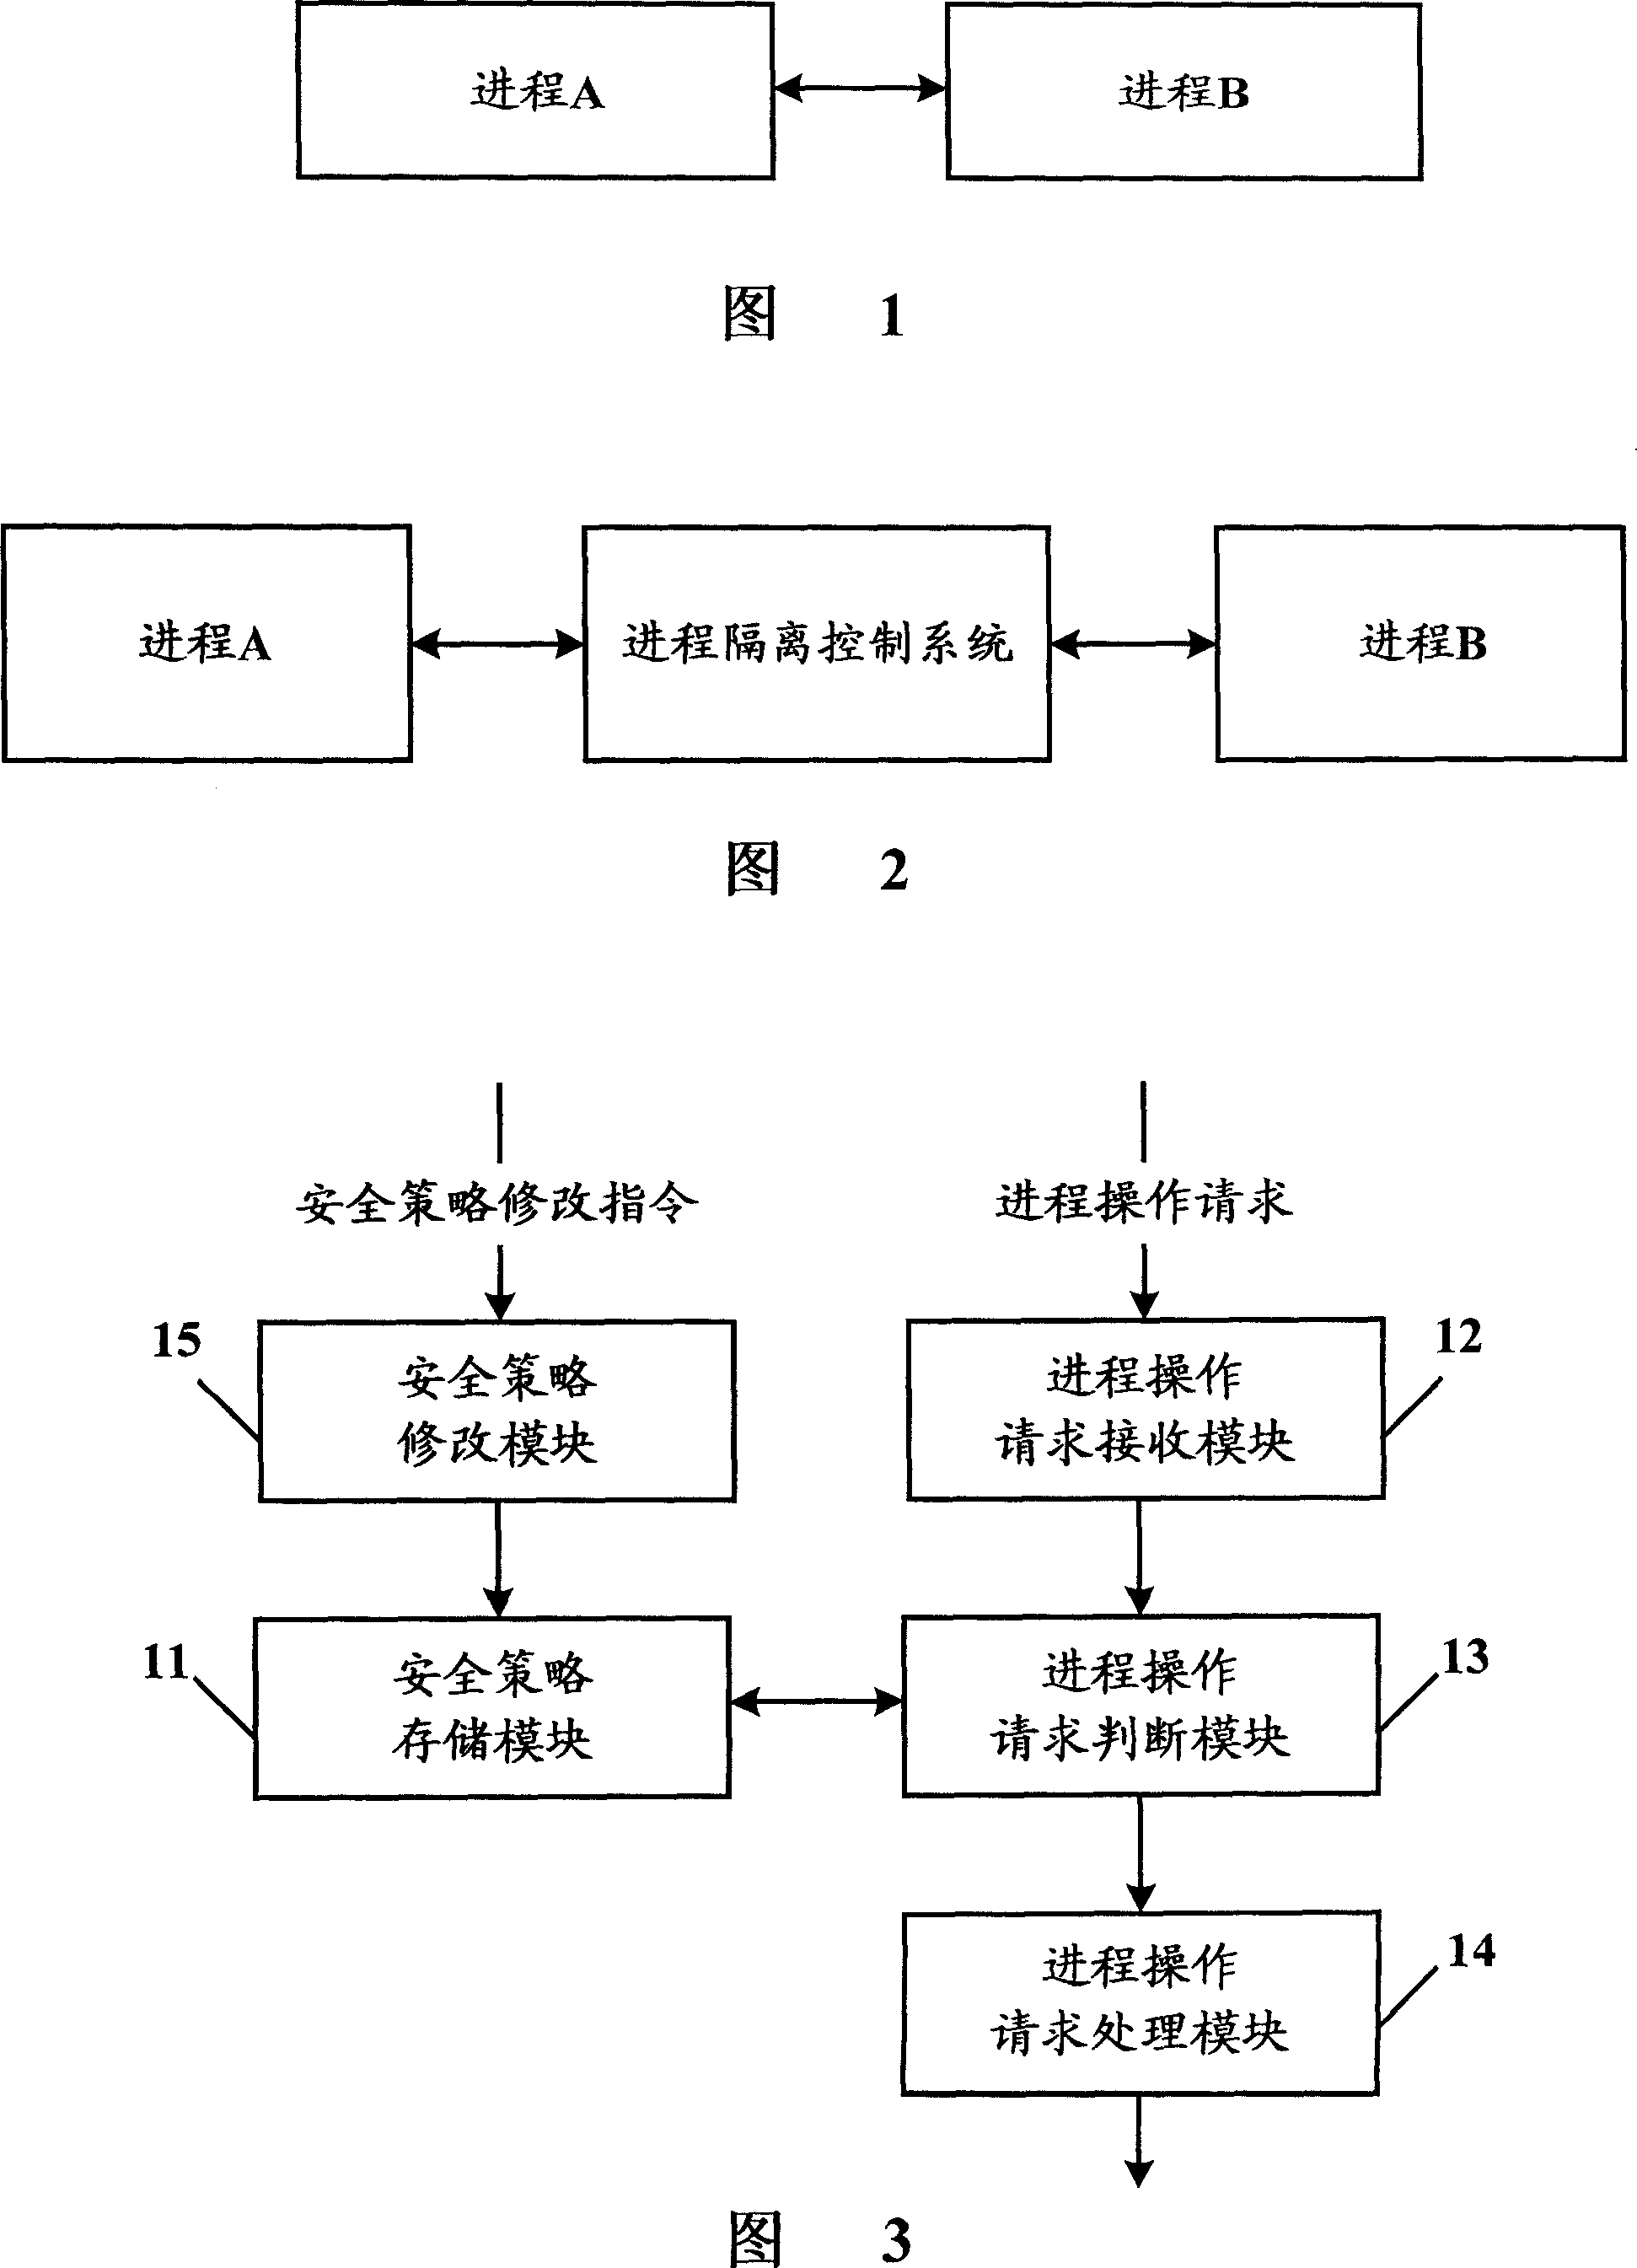 Process-isolation control system and method